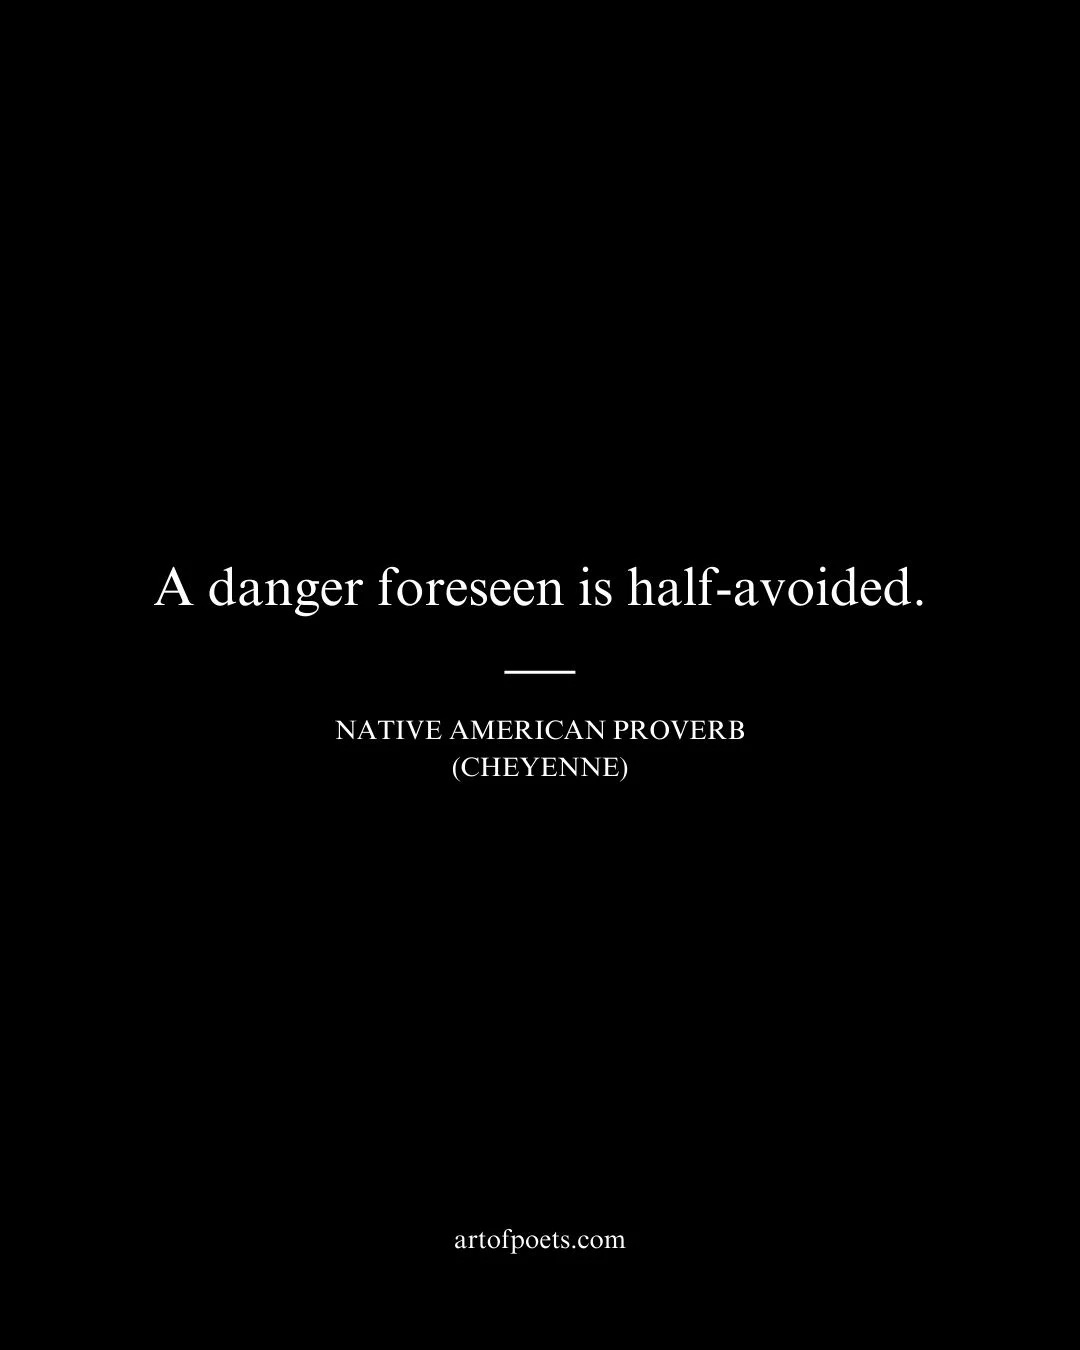 A danger foreseen is half avoided